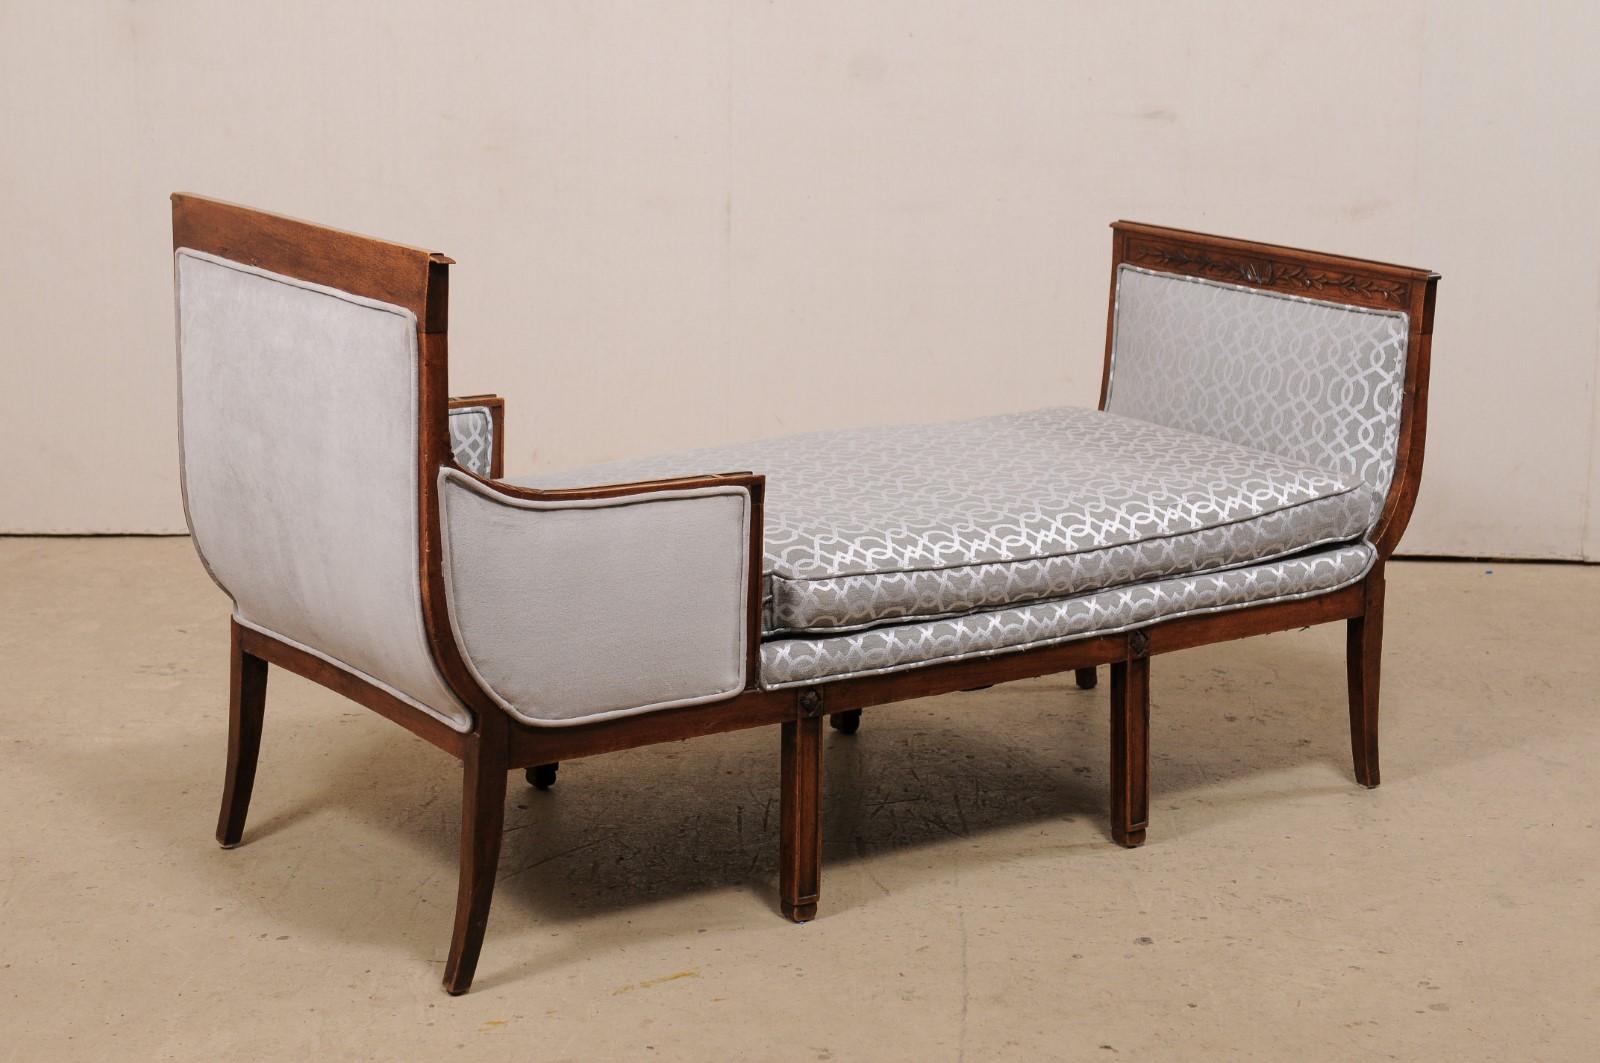 An Elegant French Duchesse en Bateau (Chaise) Newly Upholstered, 19th Century For Sale 2